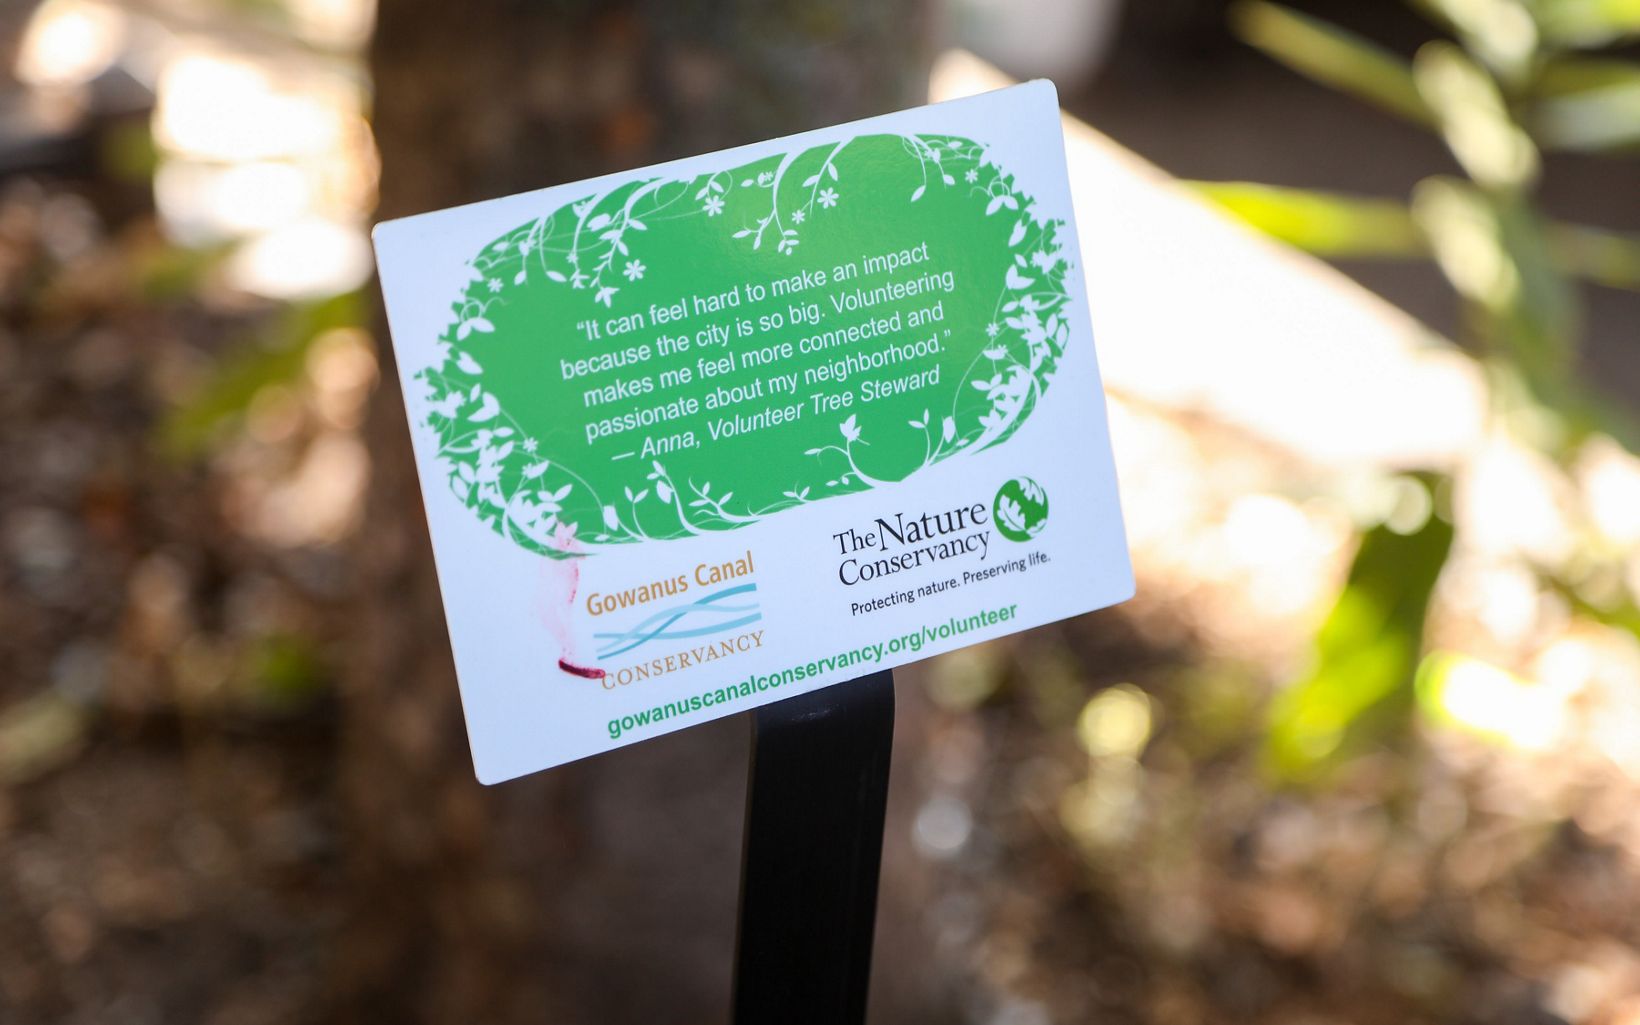 A closeup of a sign with a volunteer tree steward quote with the logos of The Nature Conservancy and Gowanus Canal Conservancy in view.